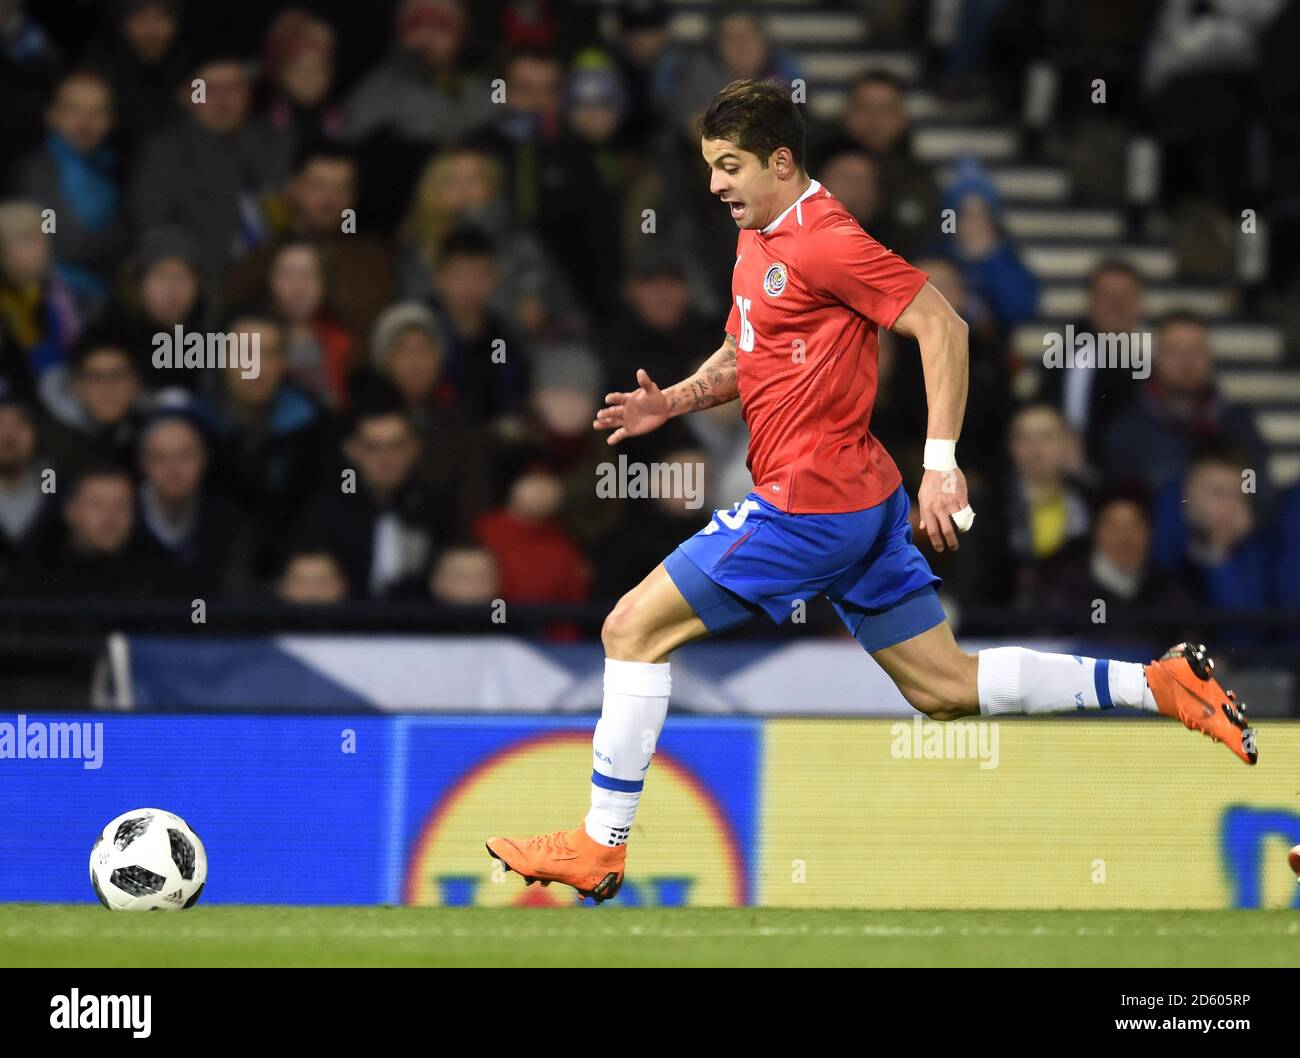 Costa Rica's Christian Gamboa in action during the international friendly match at Hampden Park, Glasgow. RESTRICTIONS: Use subject to restrictions. Editorial use only. Commercial use only with prior written consent of the Scottish FA. Stock Photo